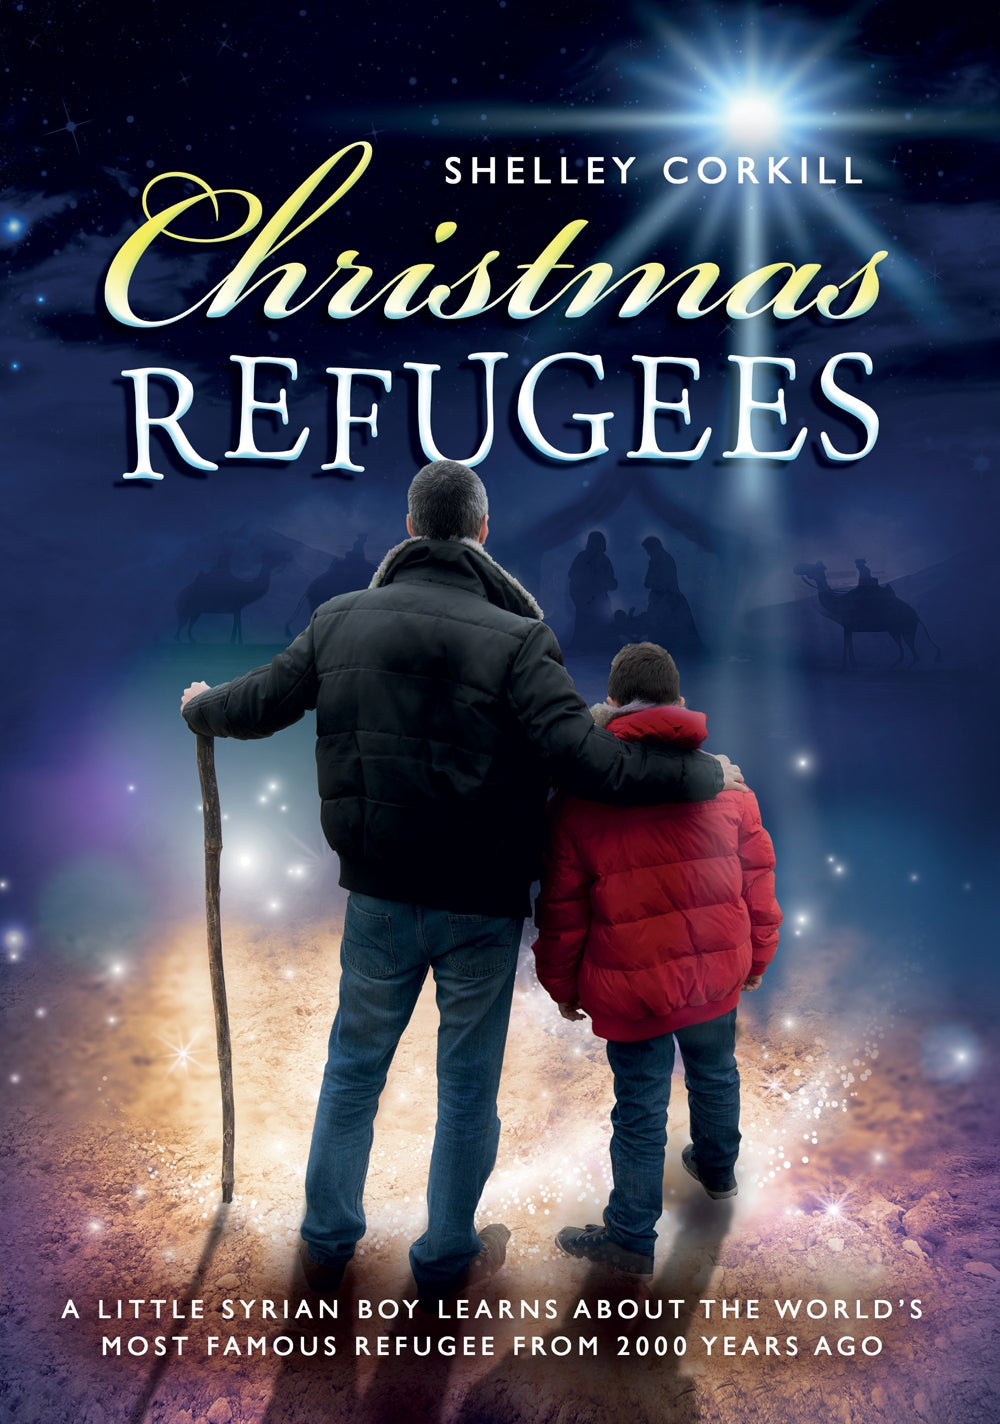 Christmas Refugees Book + Cd Licence New For 2019Christmas Refugees Book + Cd Licence New For 2019